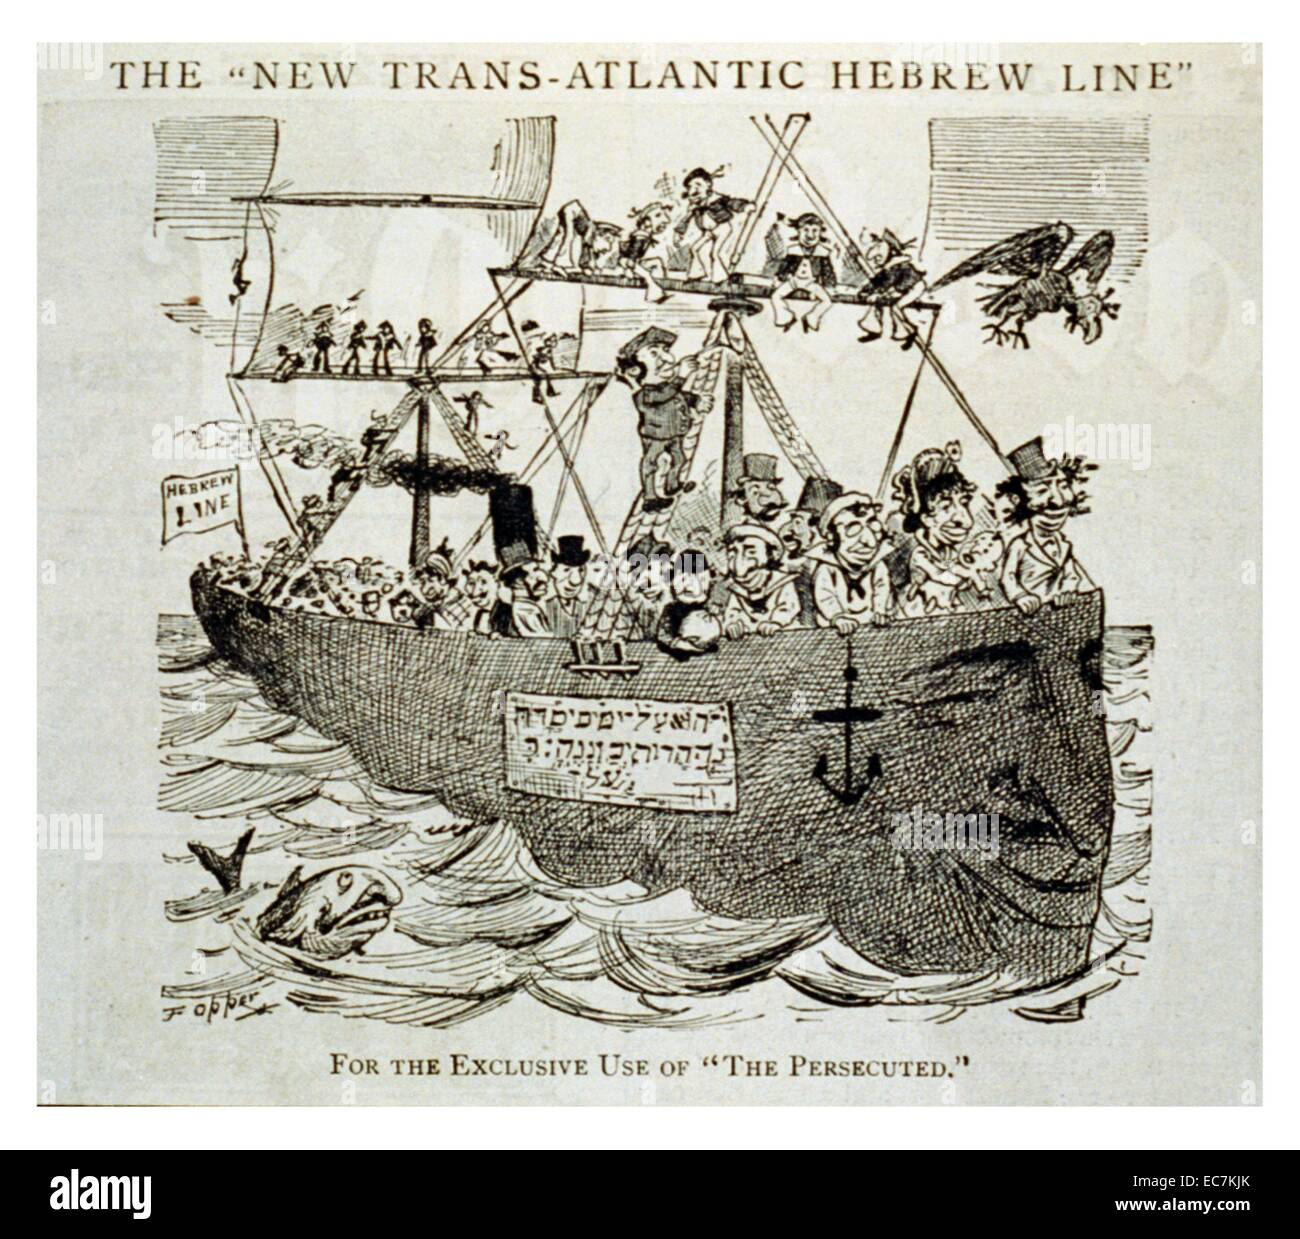 The 'New Trans-Atlantic Hebrew Line' - for the exclusive use of 'The Persecuted'. A caricature showing a crowded ship carrying Jewish immigrants. Stock Photo